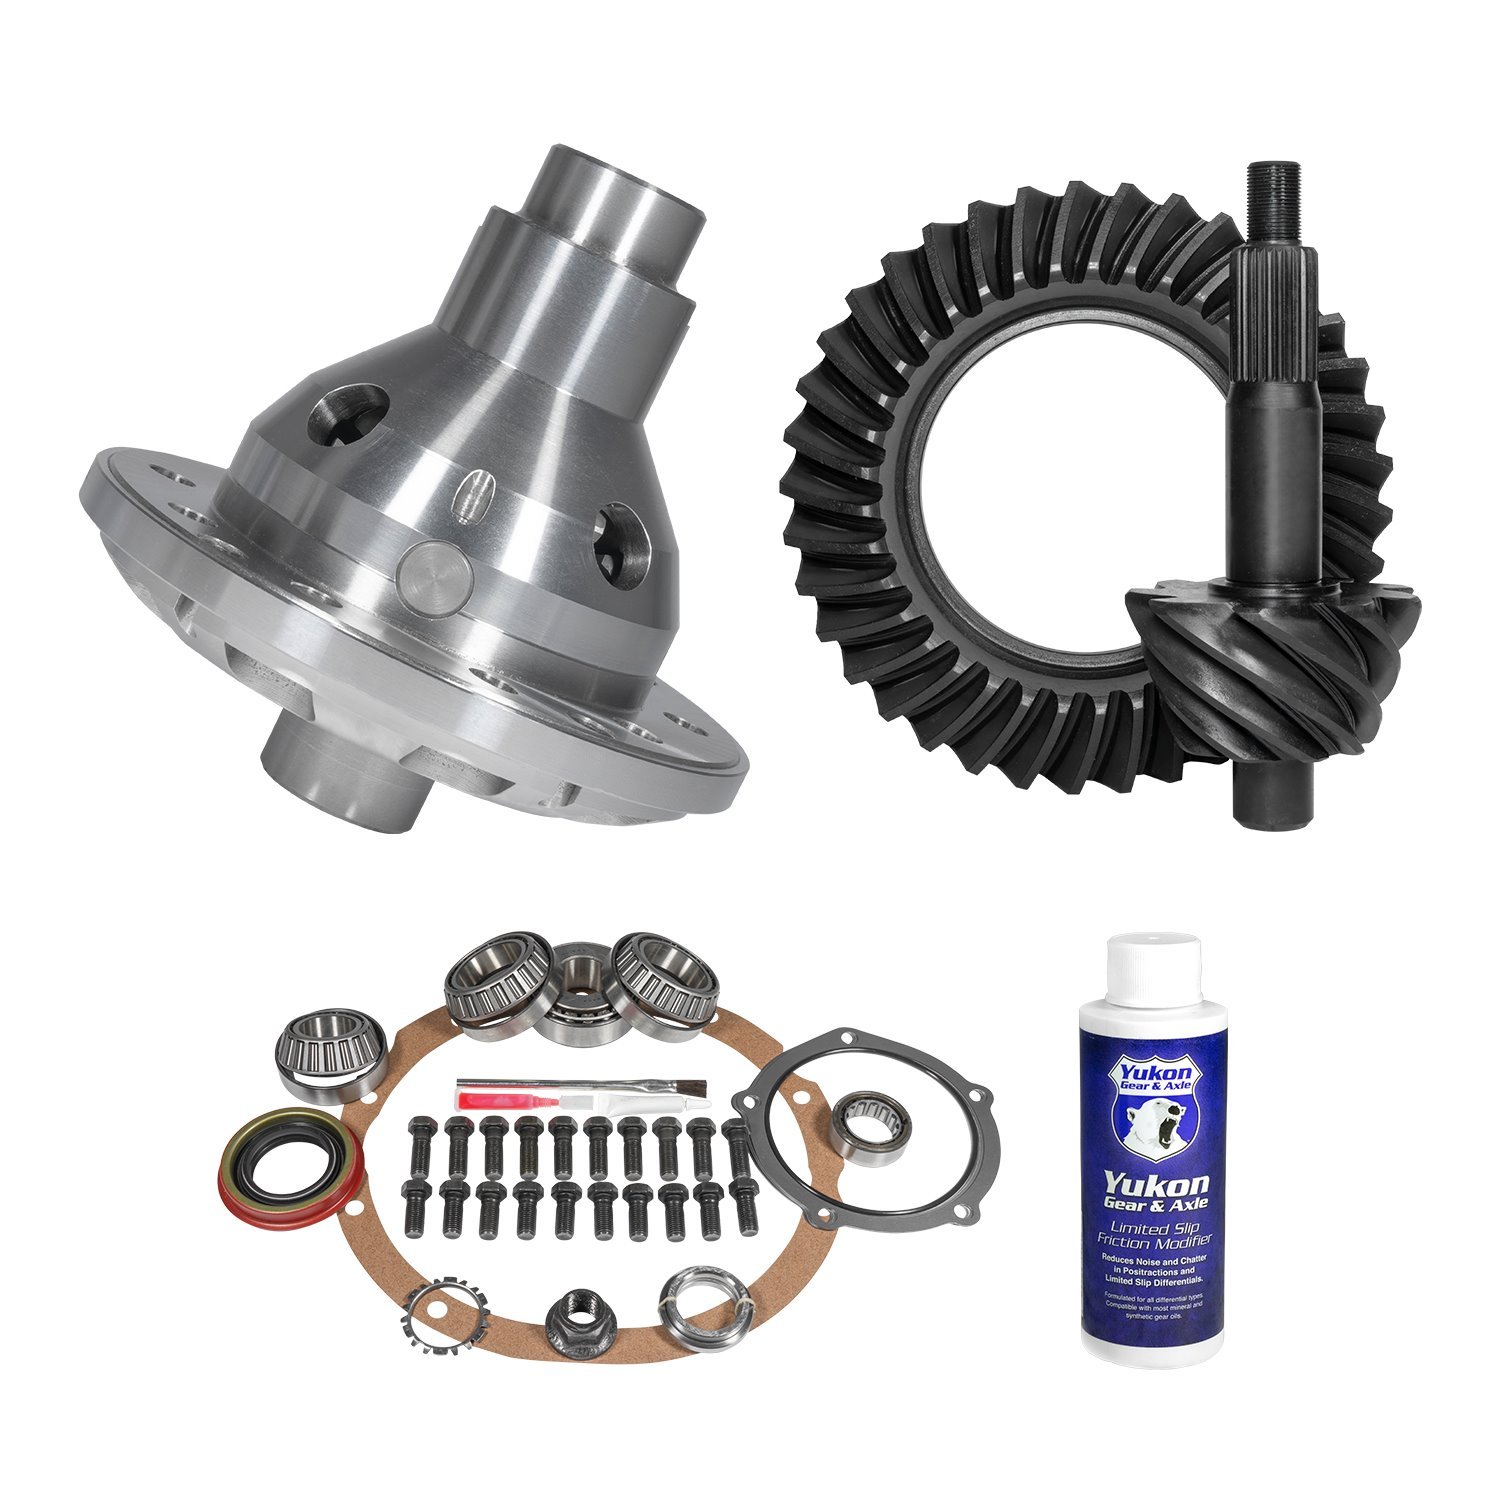 Muscle Car Limited Slip & Re-Gear Kit For Ford 9 in., 28 Spline, 3.89 Ratio